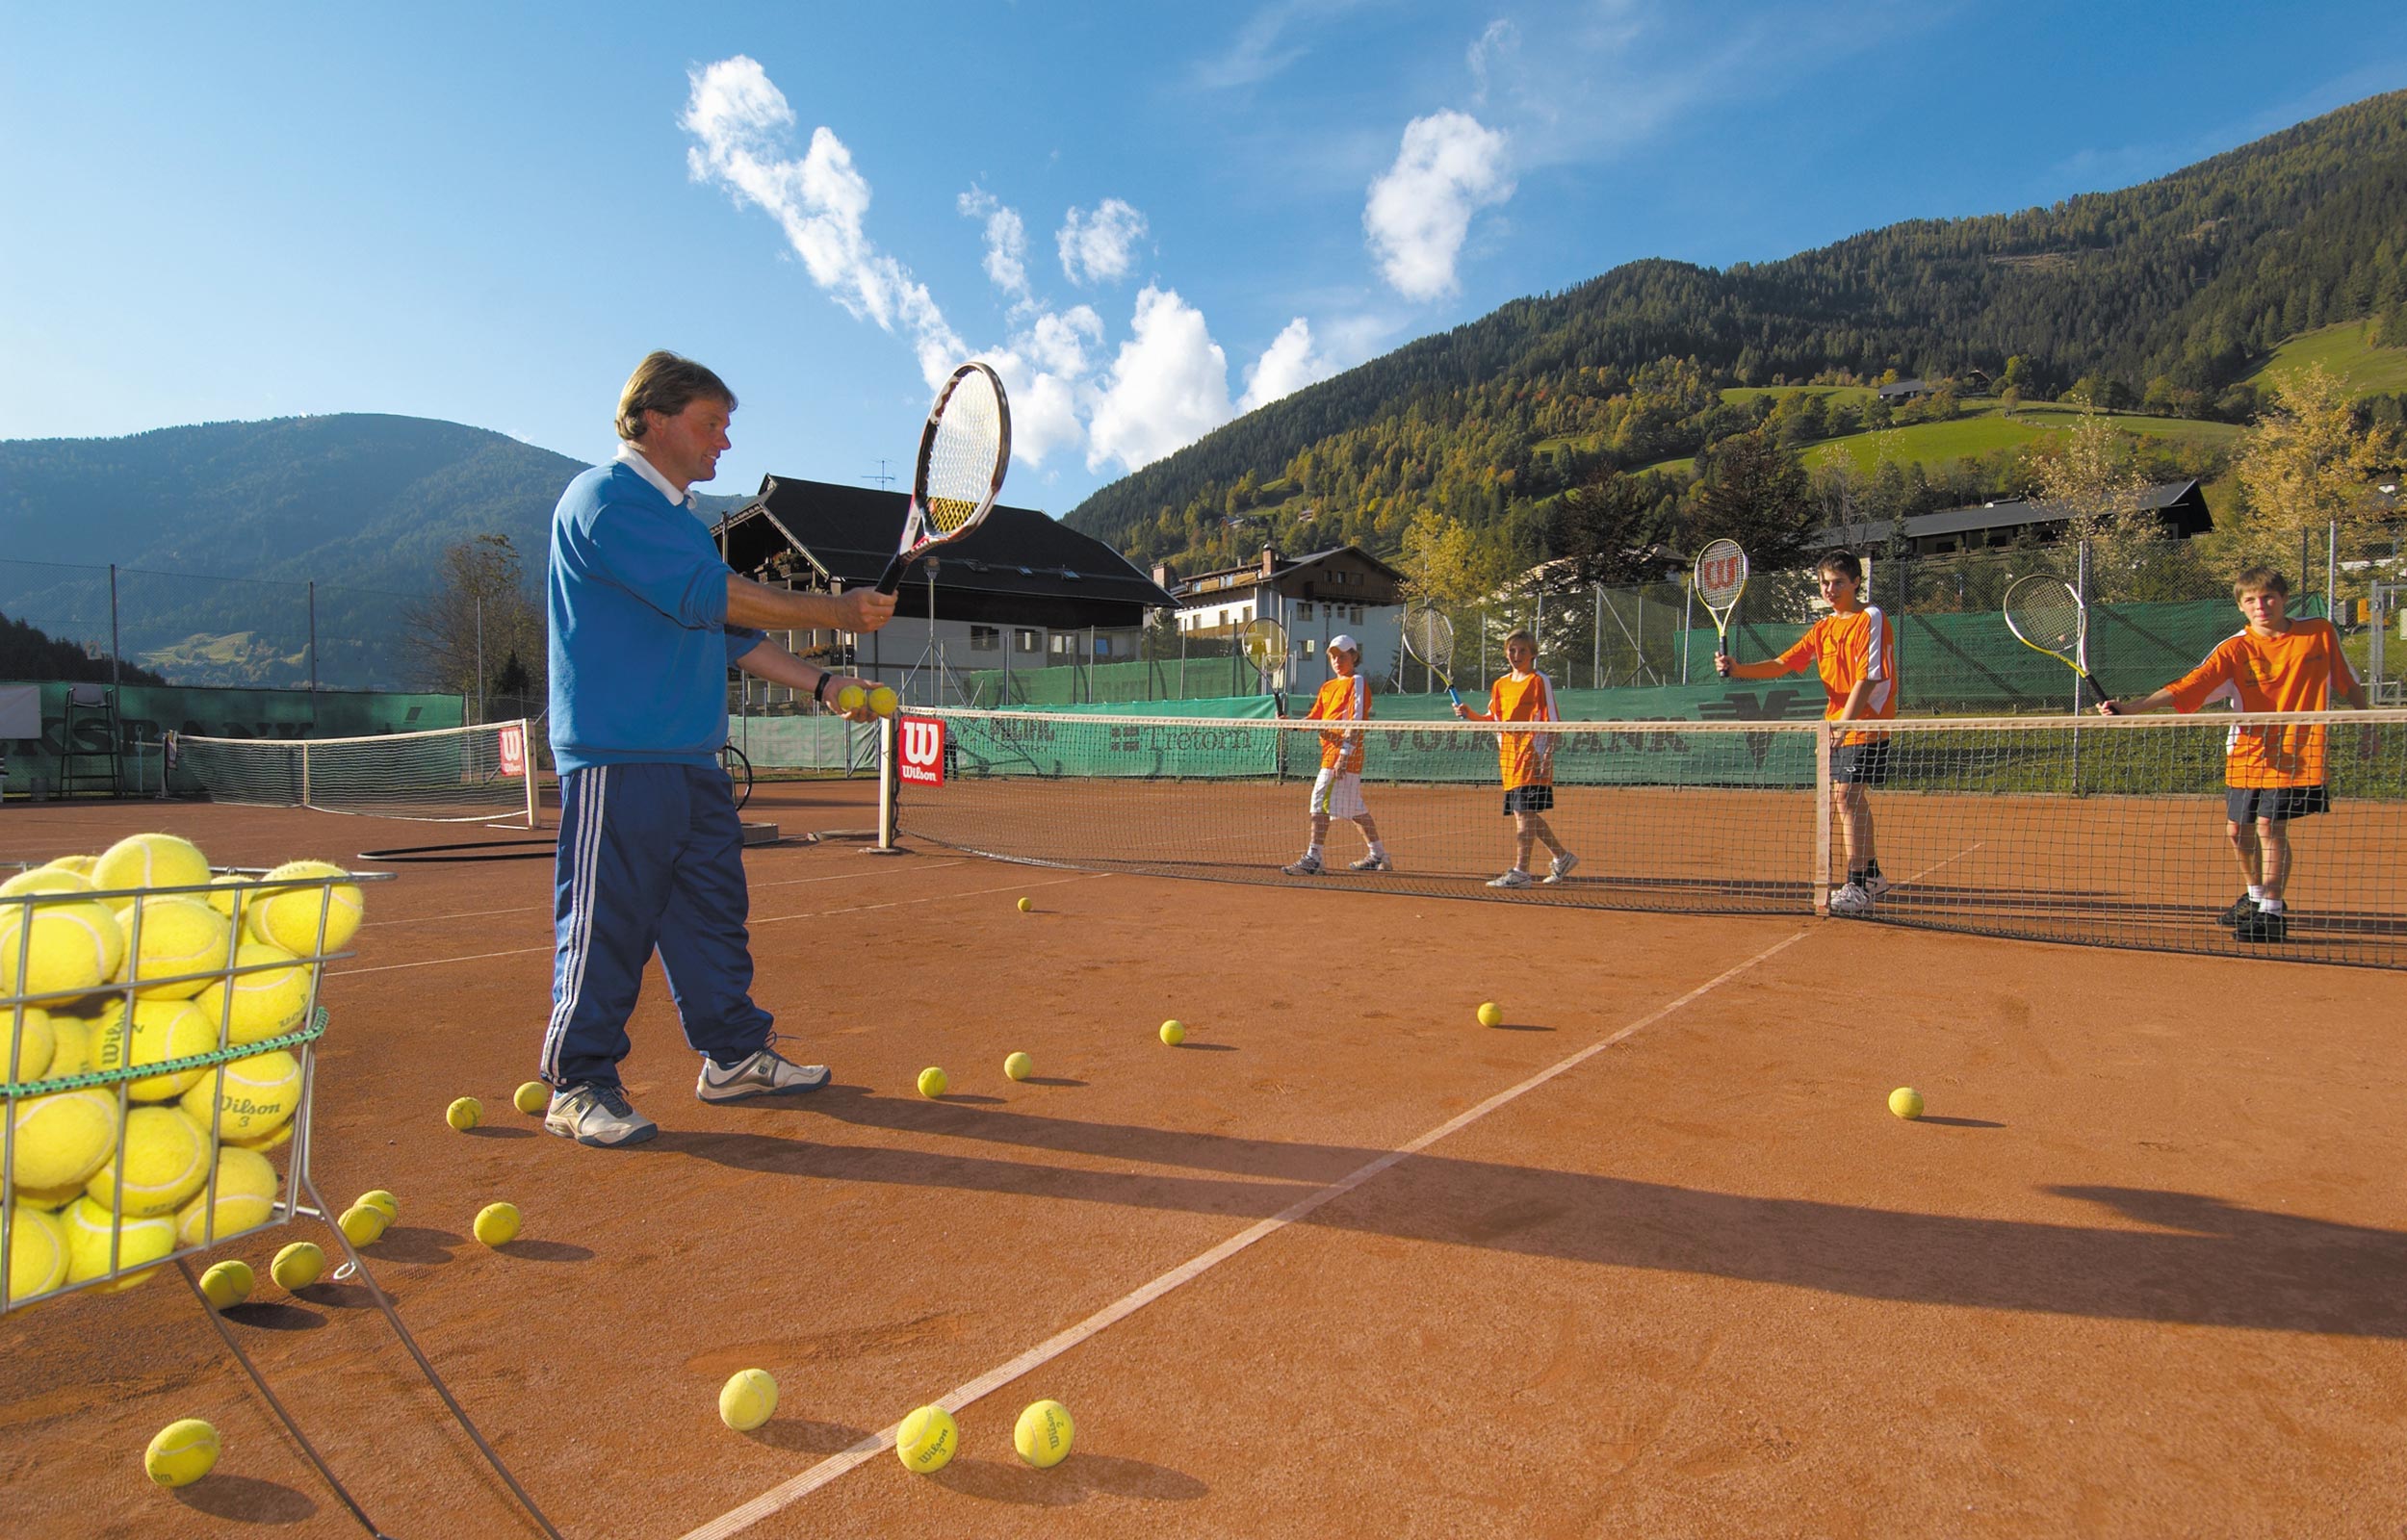 A tennis instructor is teaching his students tennis, there are already a few tennis balls on the floor.